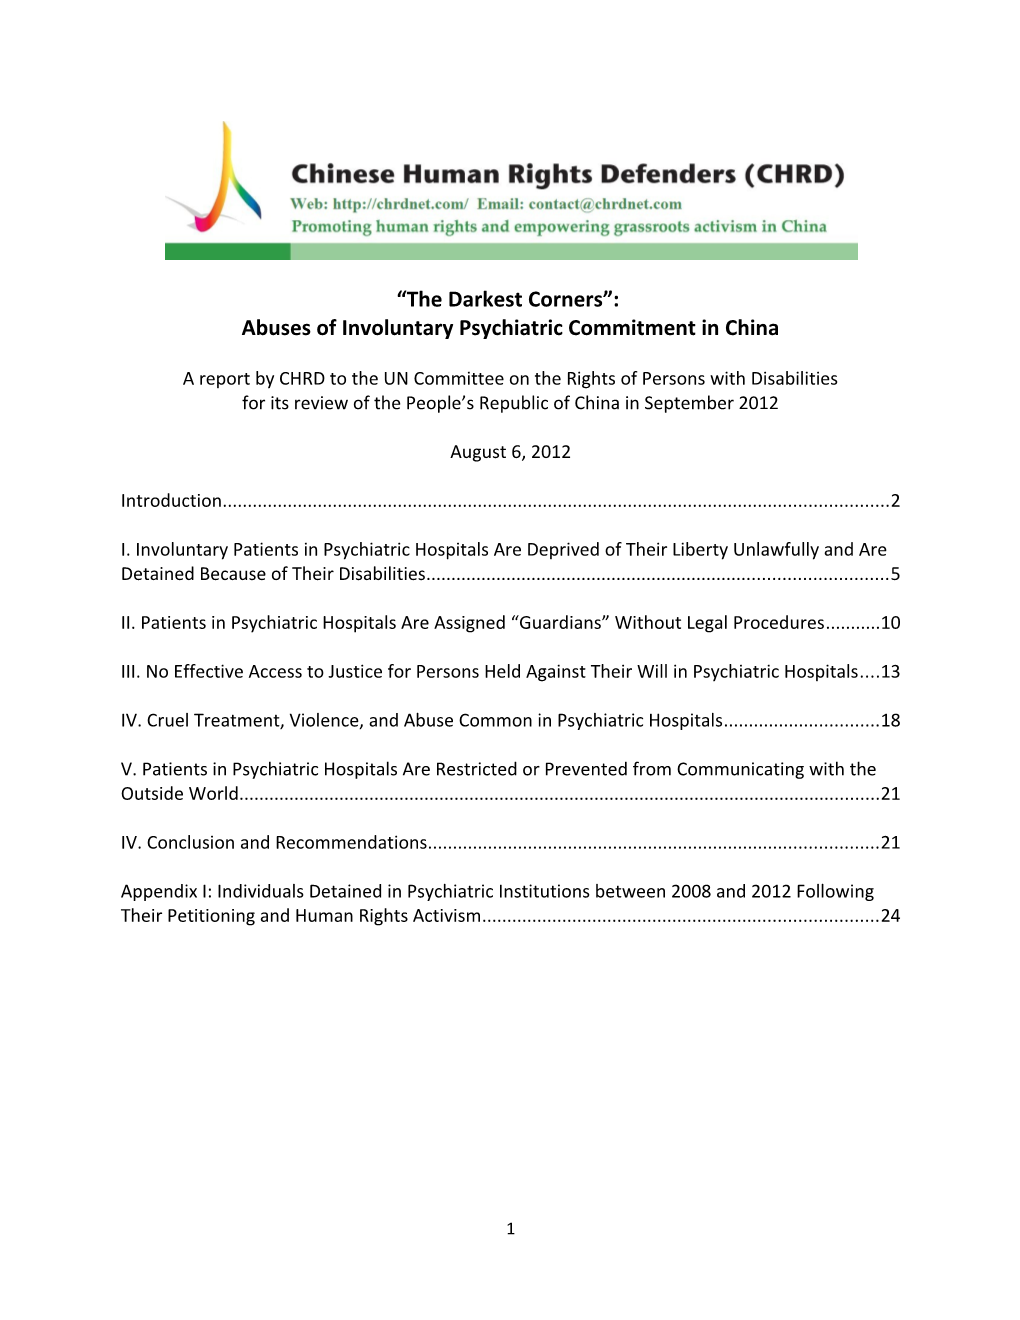 Abuses of Involuntary Psychiatric Commitment in China